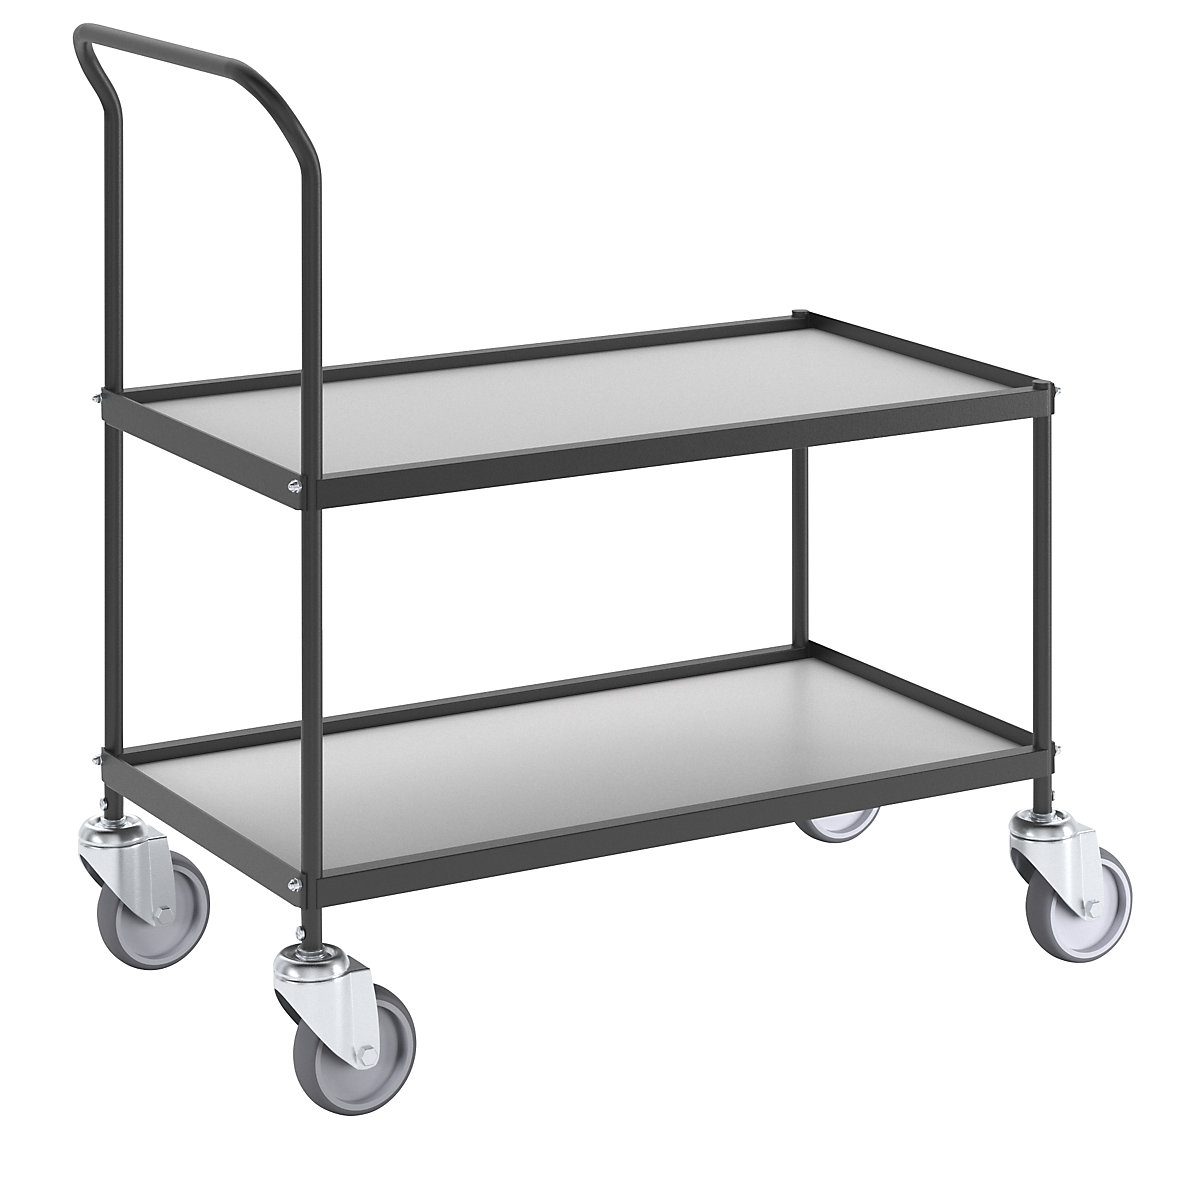 Serving and clearing trolley, 2 shelves, LxWxH 840 x 470 x 960 mm, 2+ items-12